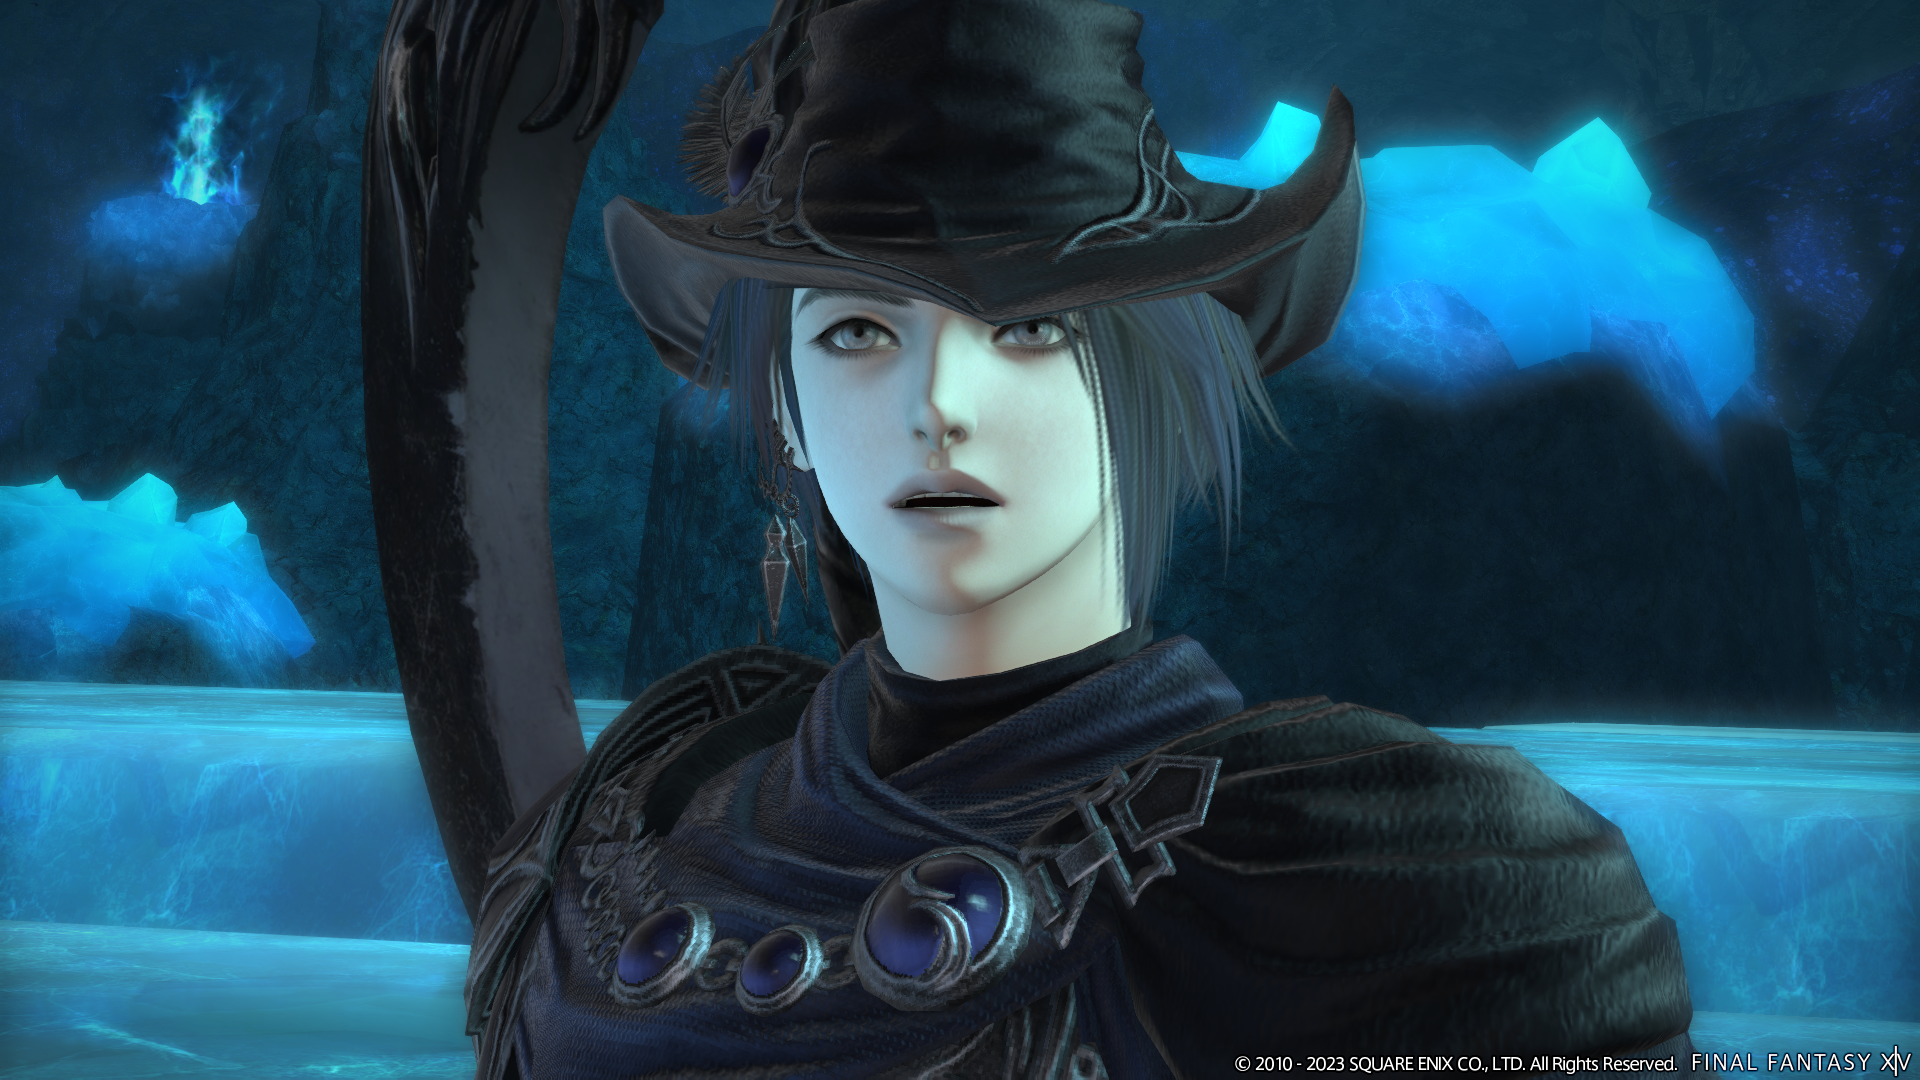 Final Fantasy XIV Patch 6.4 The Dark Throne Releasing Late May 2023; Trailer, Screenshots & Features